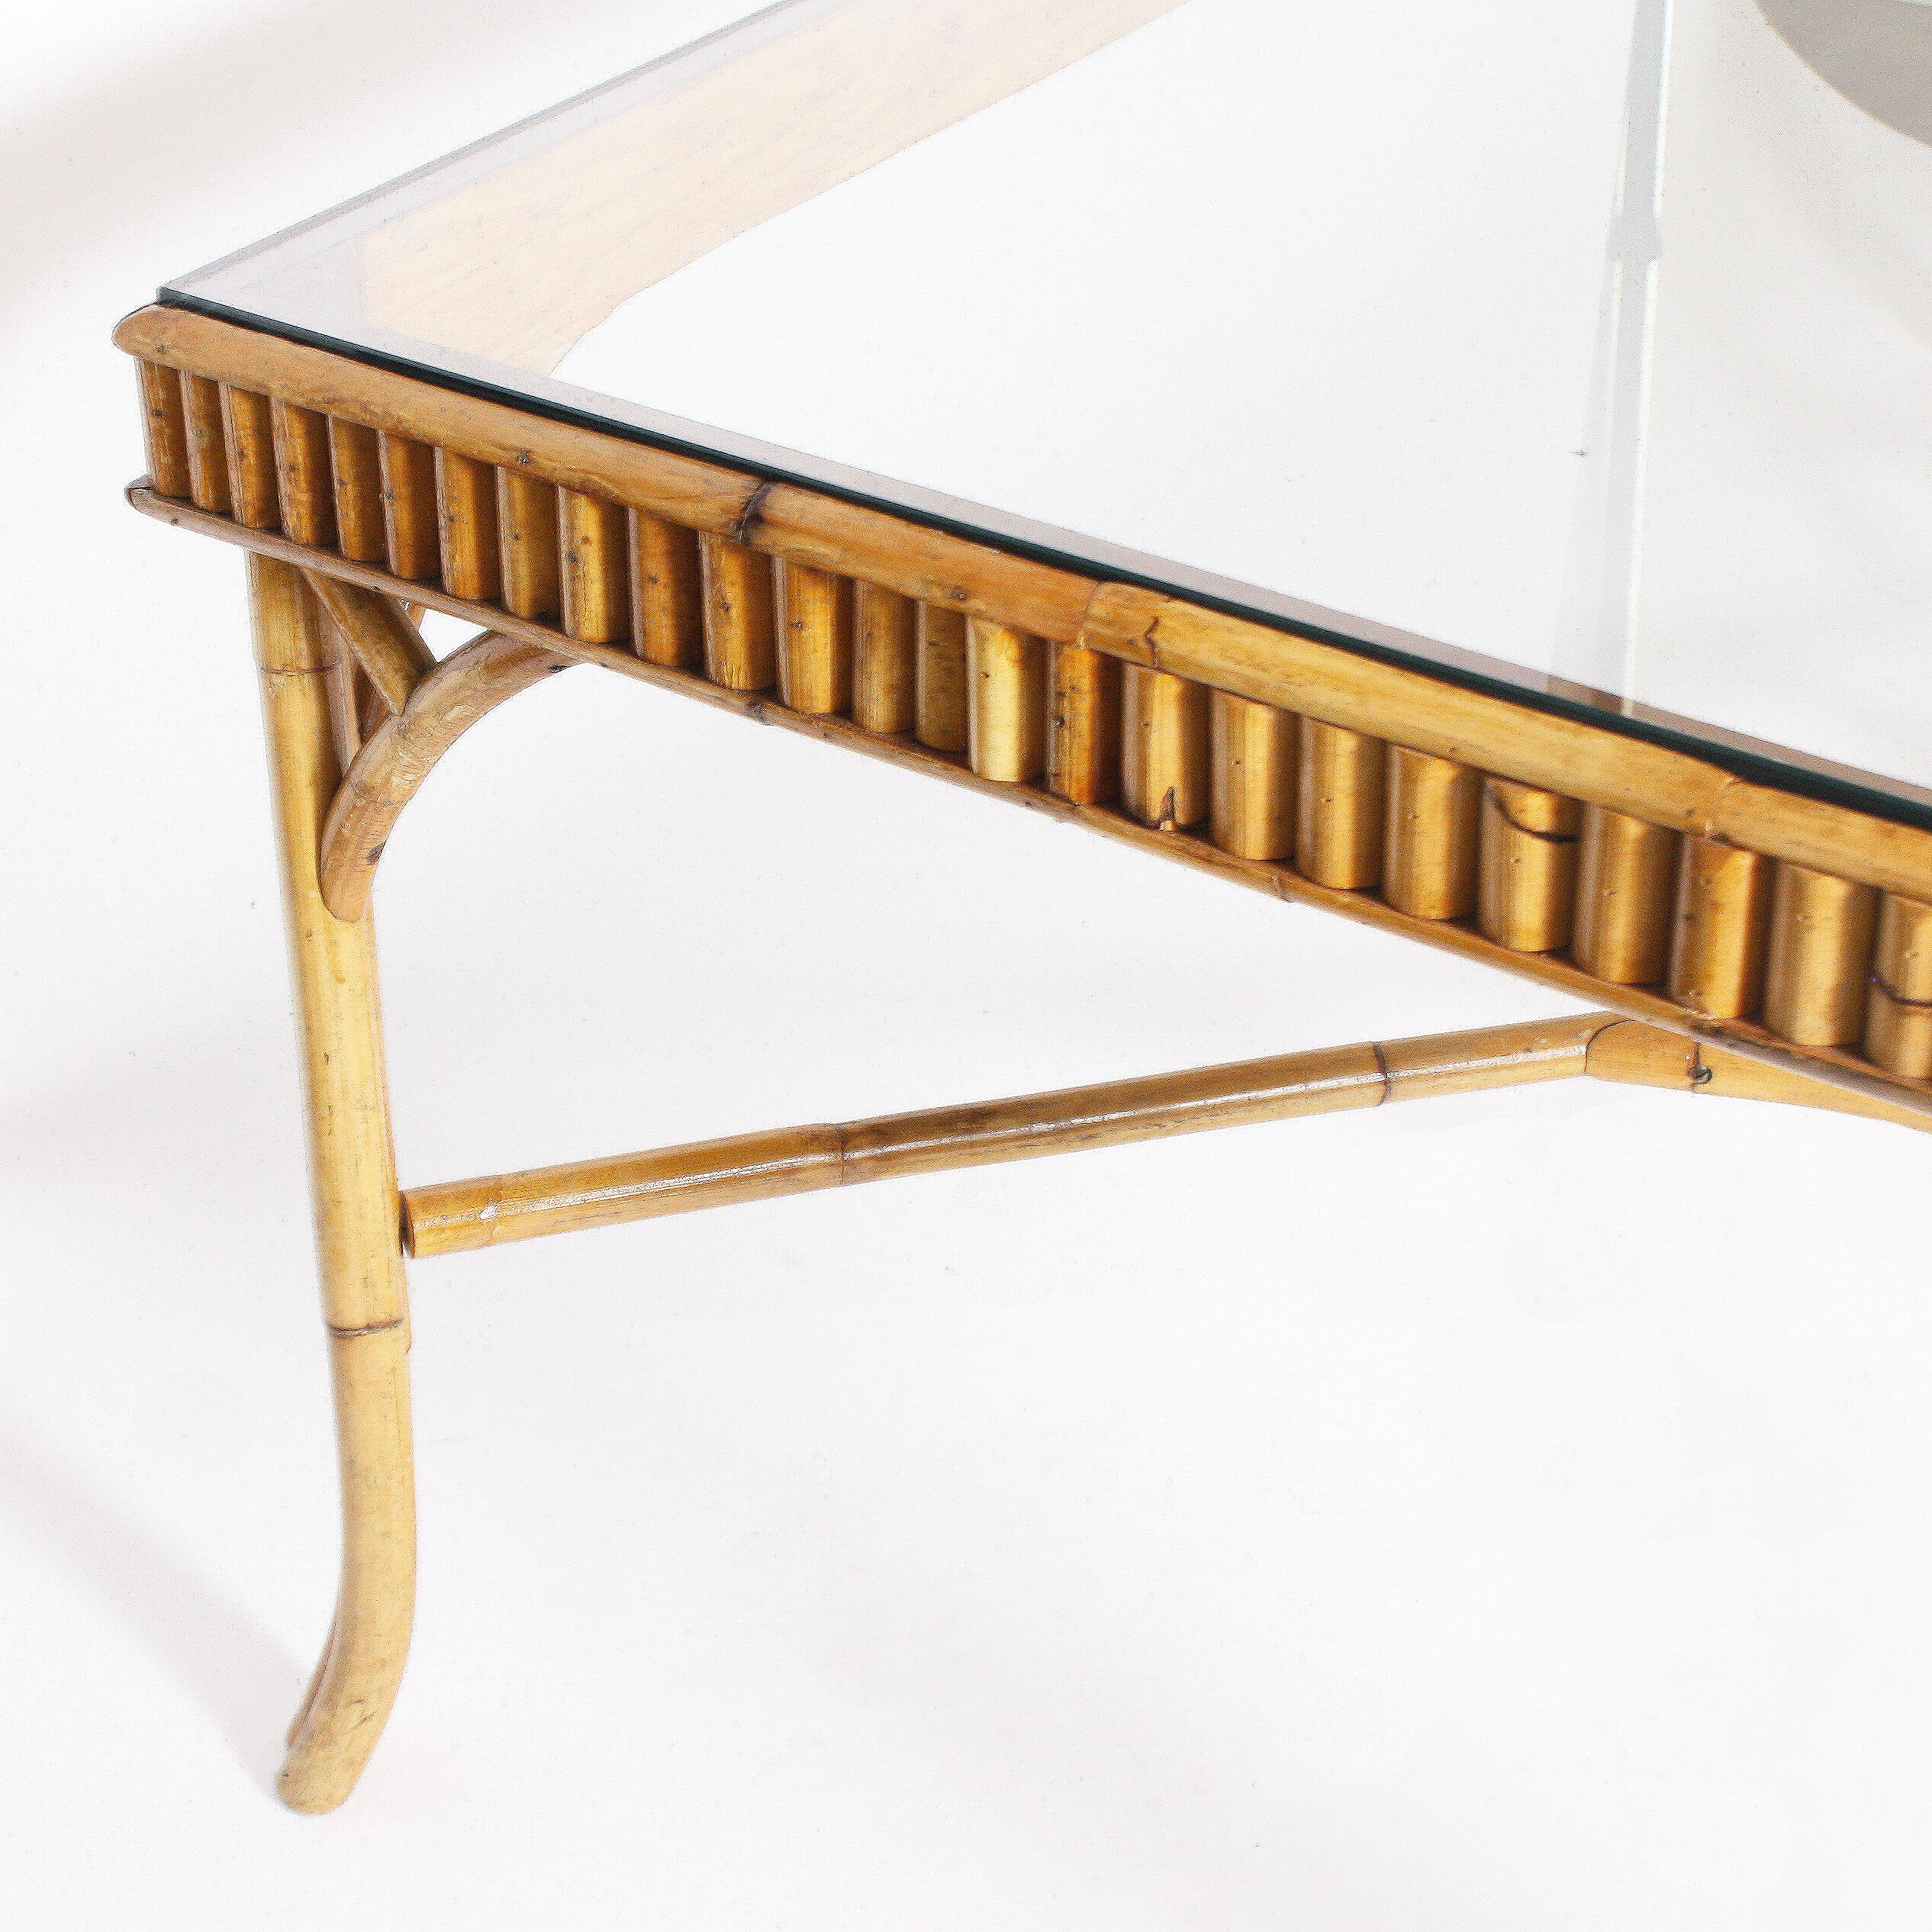 Bamboo dining table, circa 1960.
Measures: 73” W X 43 1/2” D X 28 3/4” H.